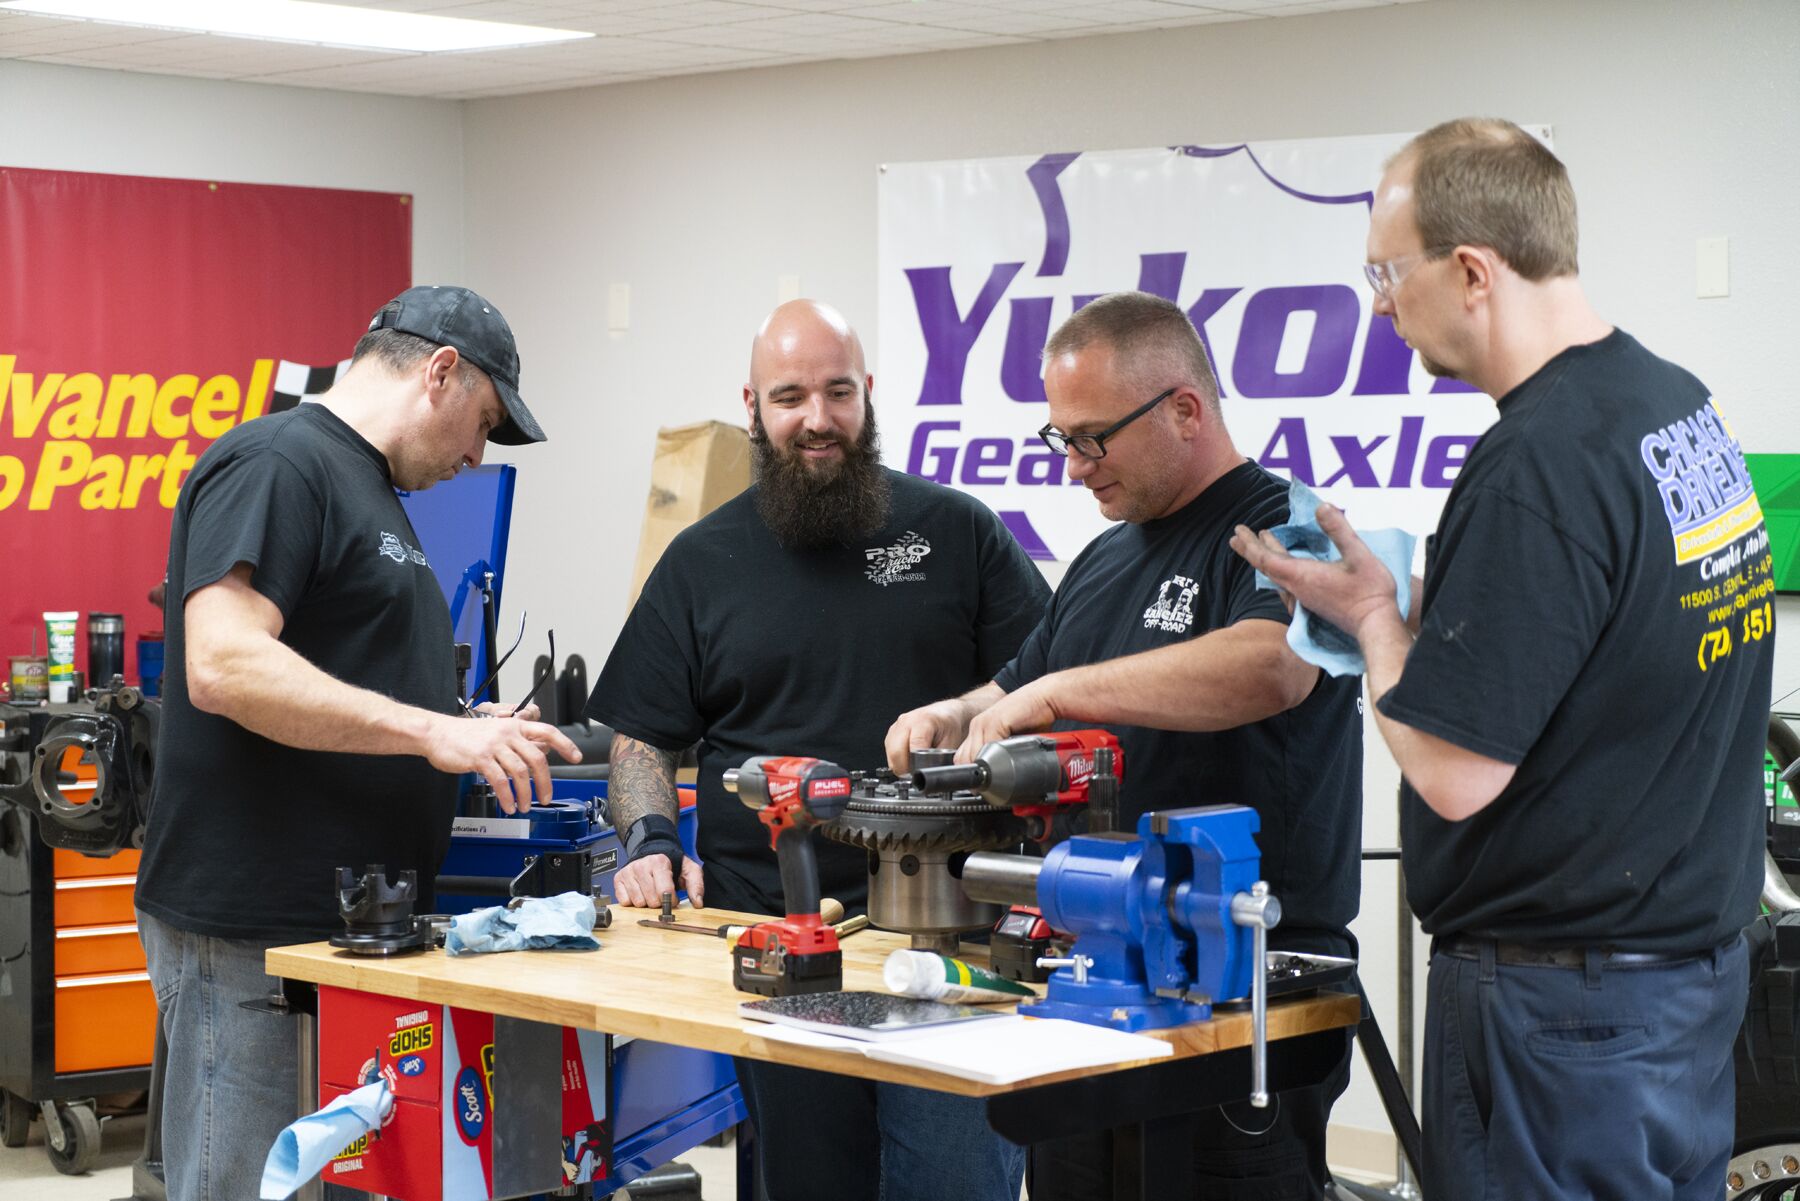 Yukon Gear & Axle Certifies Six New 'Master Installers' During First Training Course | THE SHOP